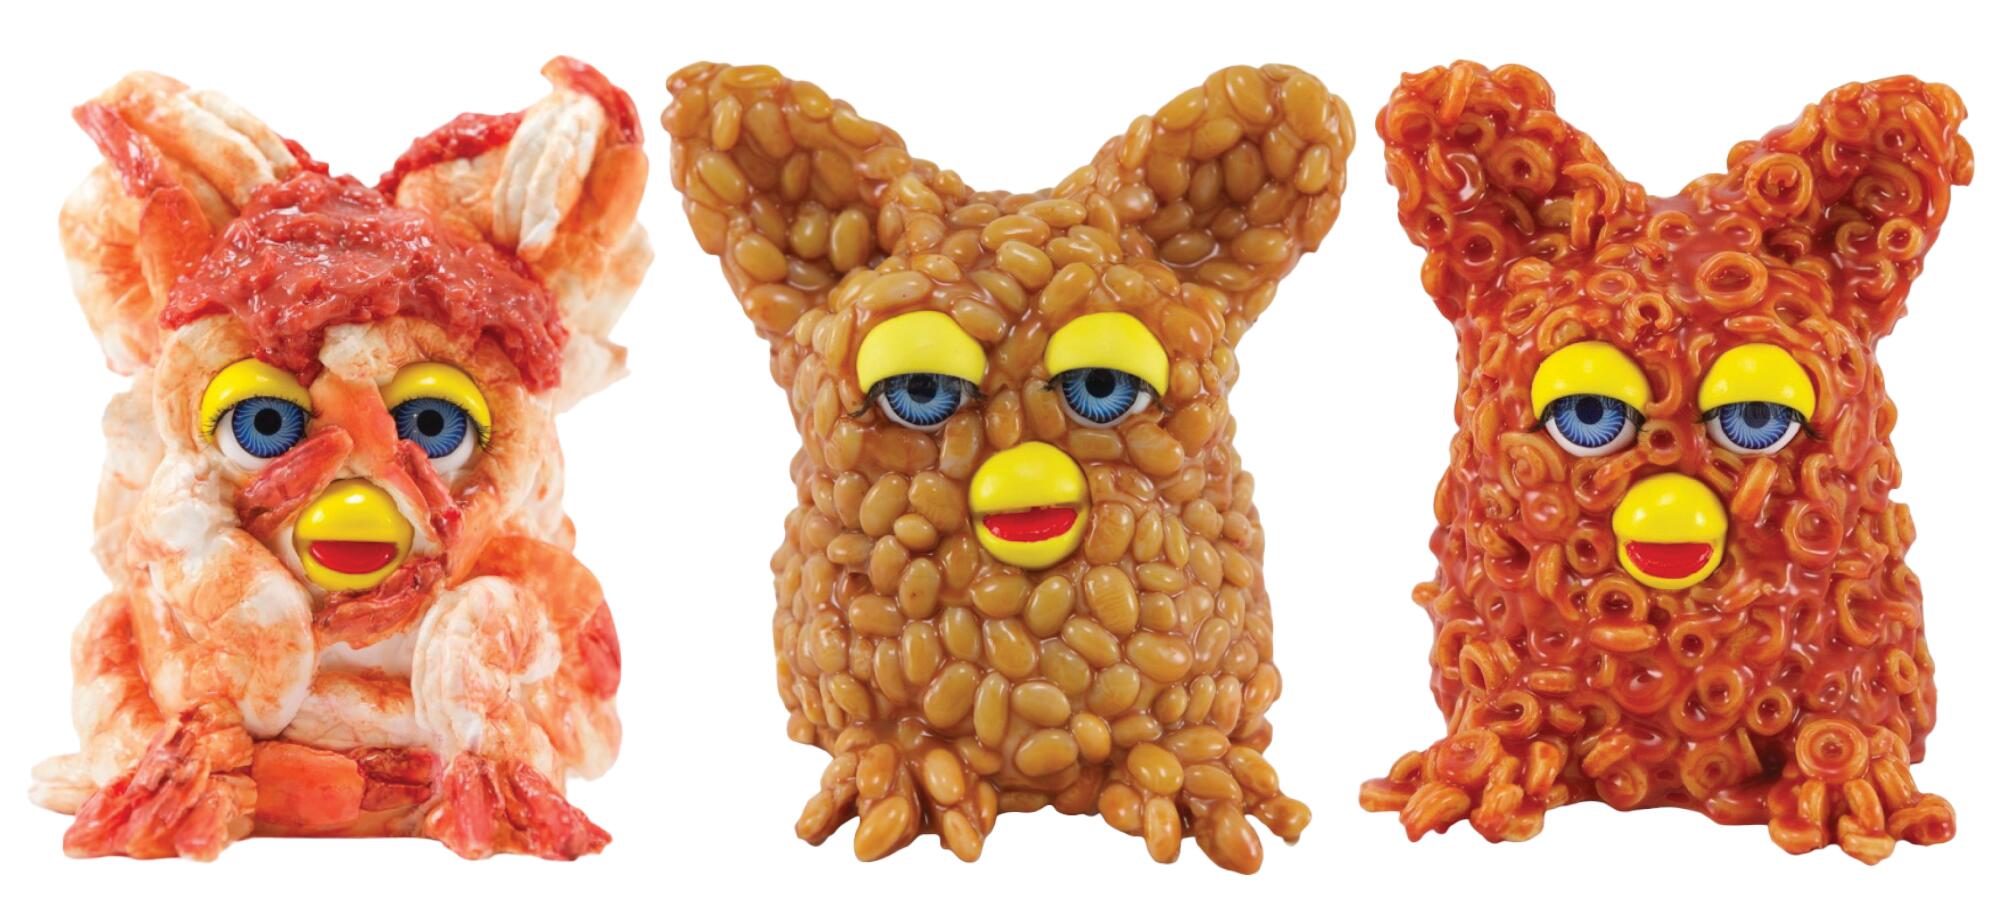 Furby-inspired sculptures by Sophie Stark.